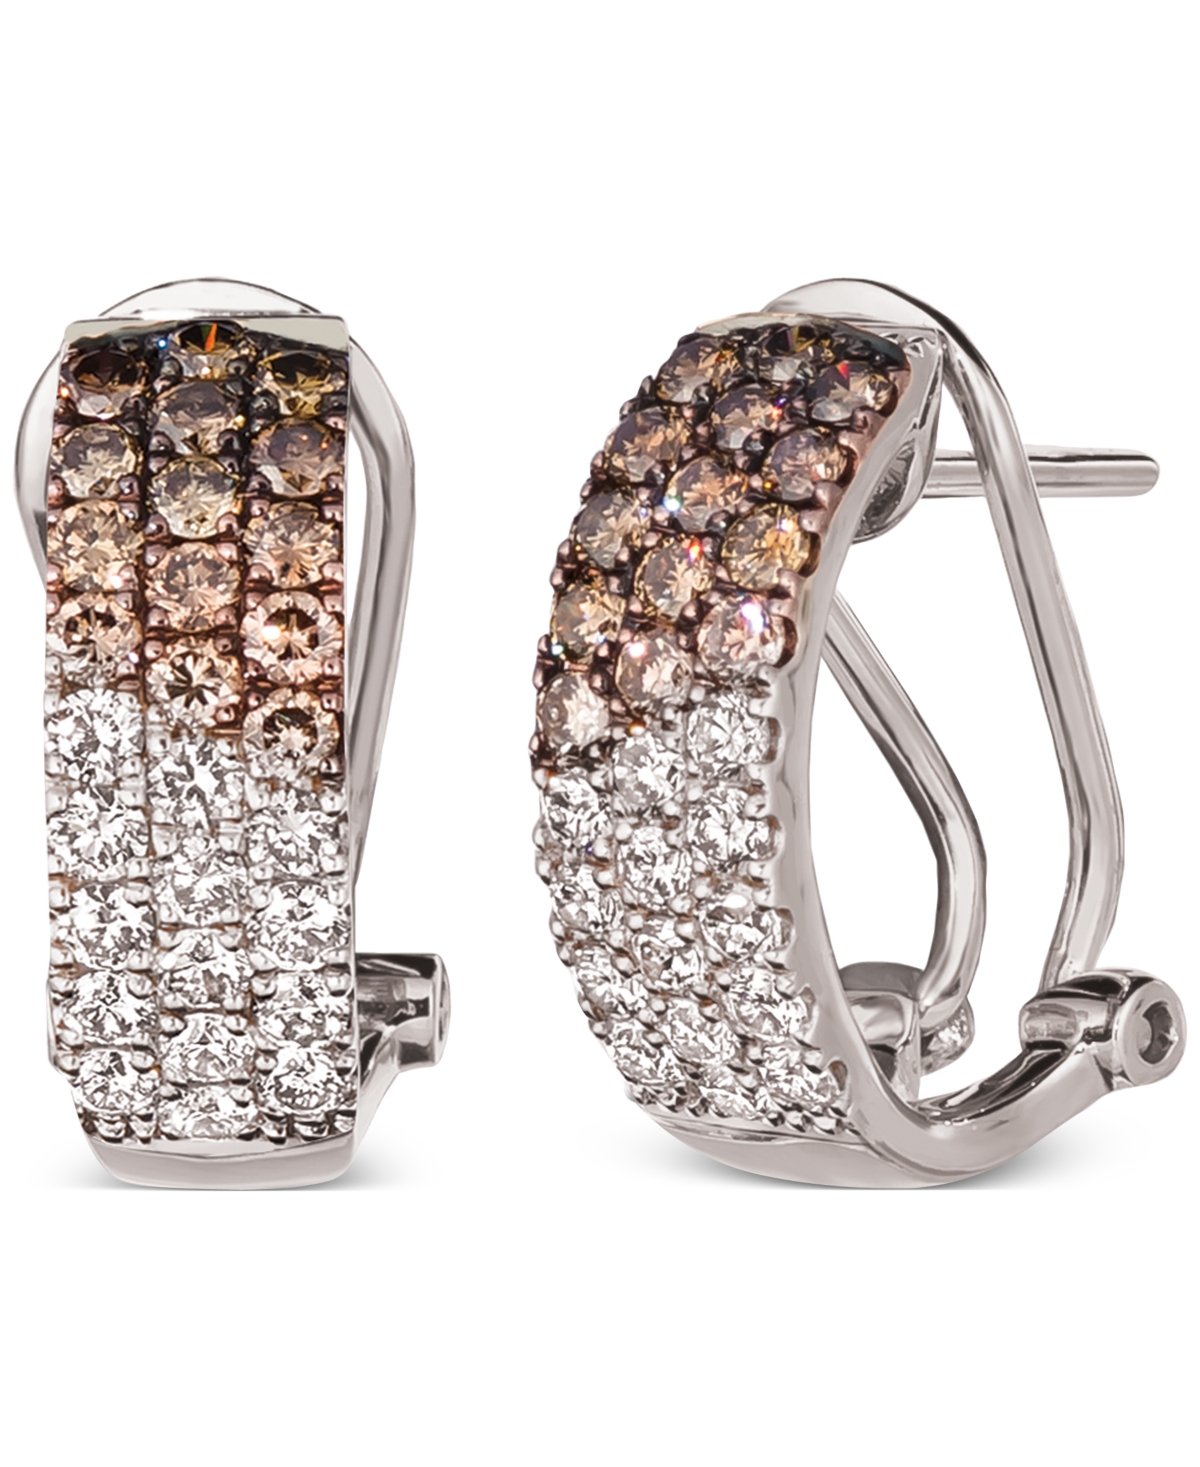 Ombre Chocolate Diamond & Nude Diamond (1-1/4 ct. t.w.) Omega Hoop Earrings in 14k Rose Gold, White Gold or Yellow Gold - Yellow Gold